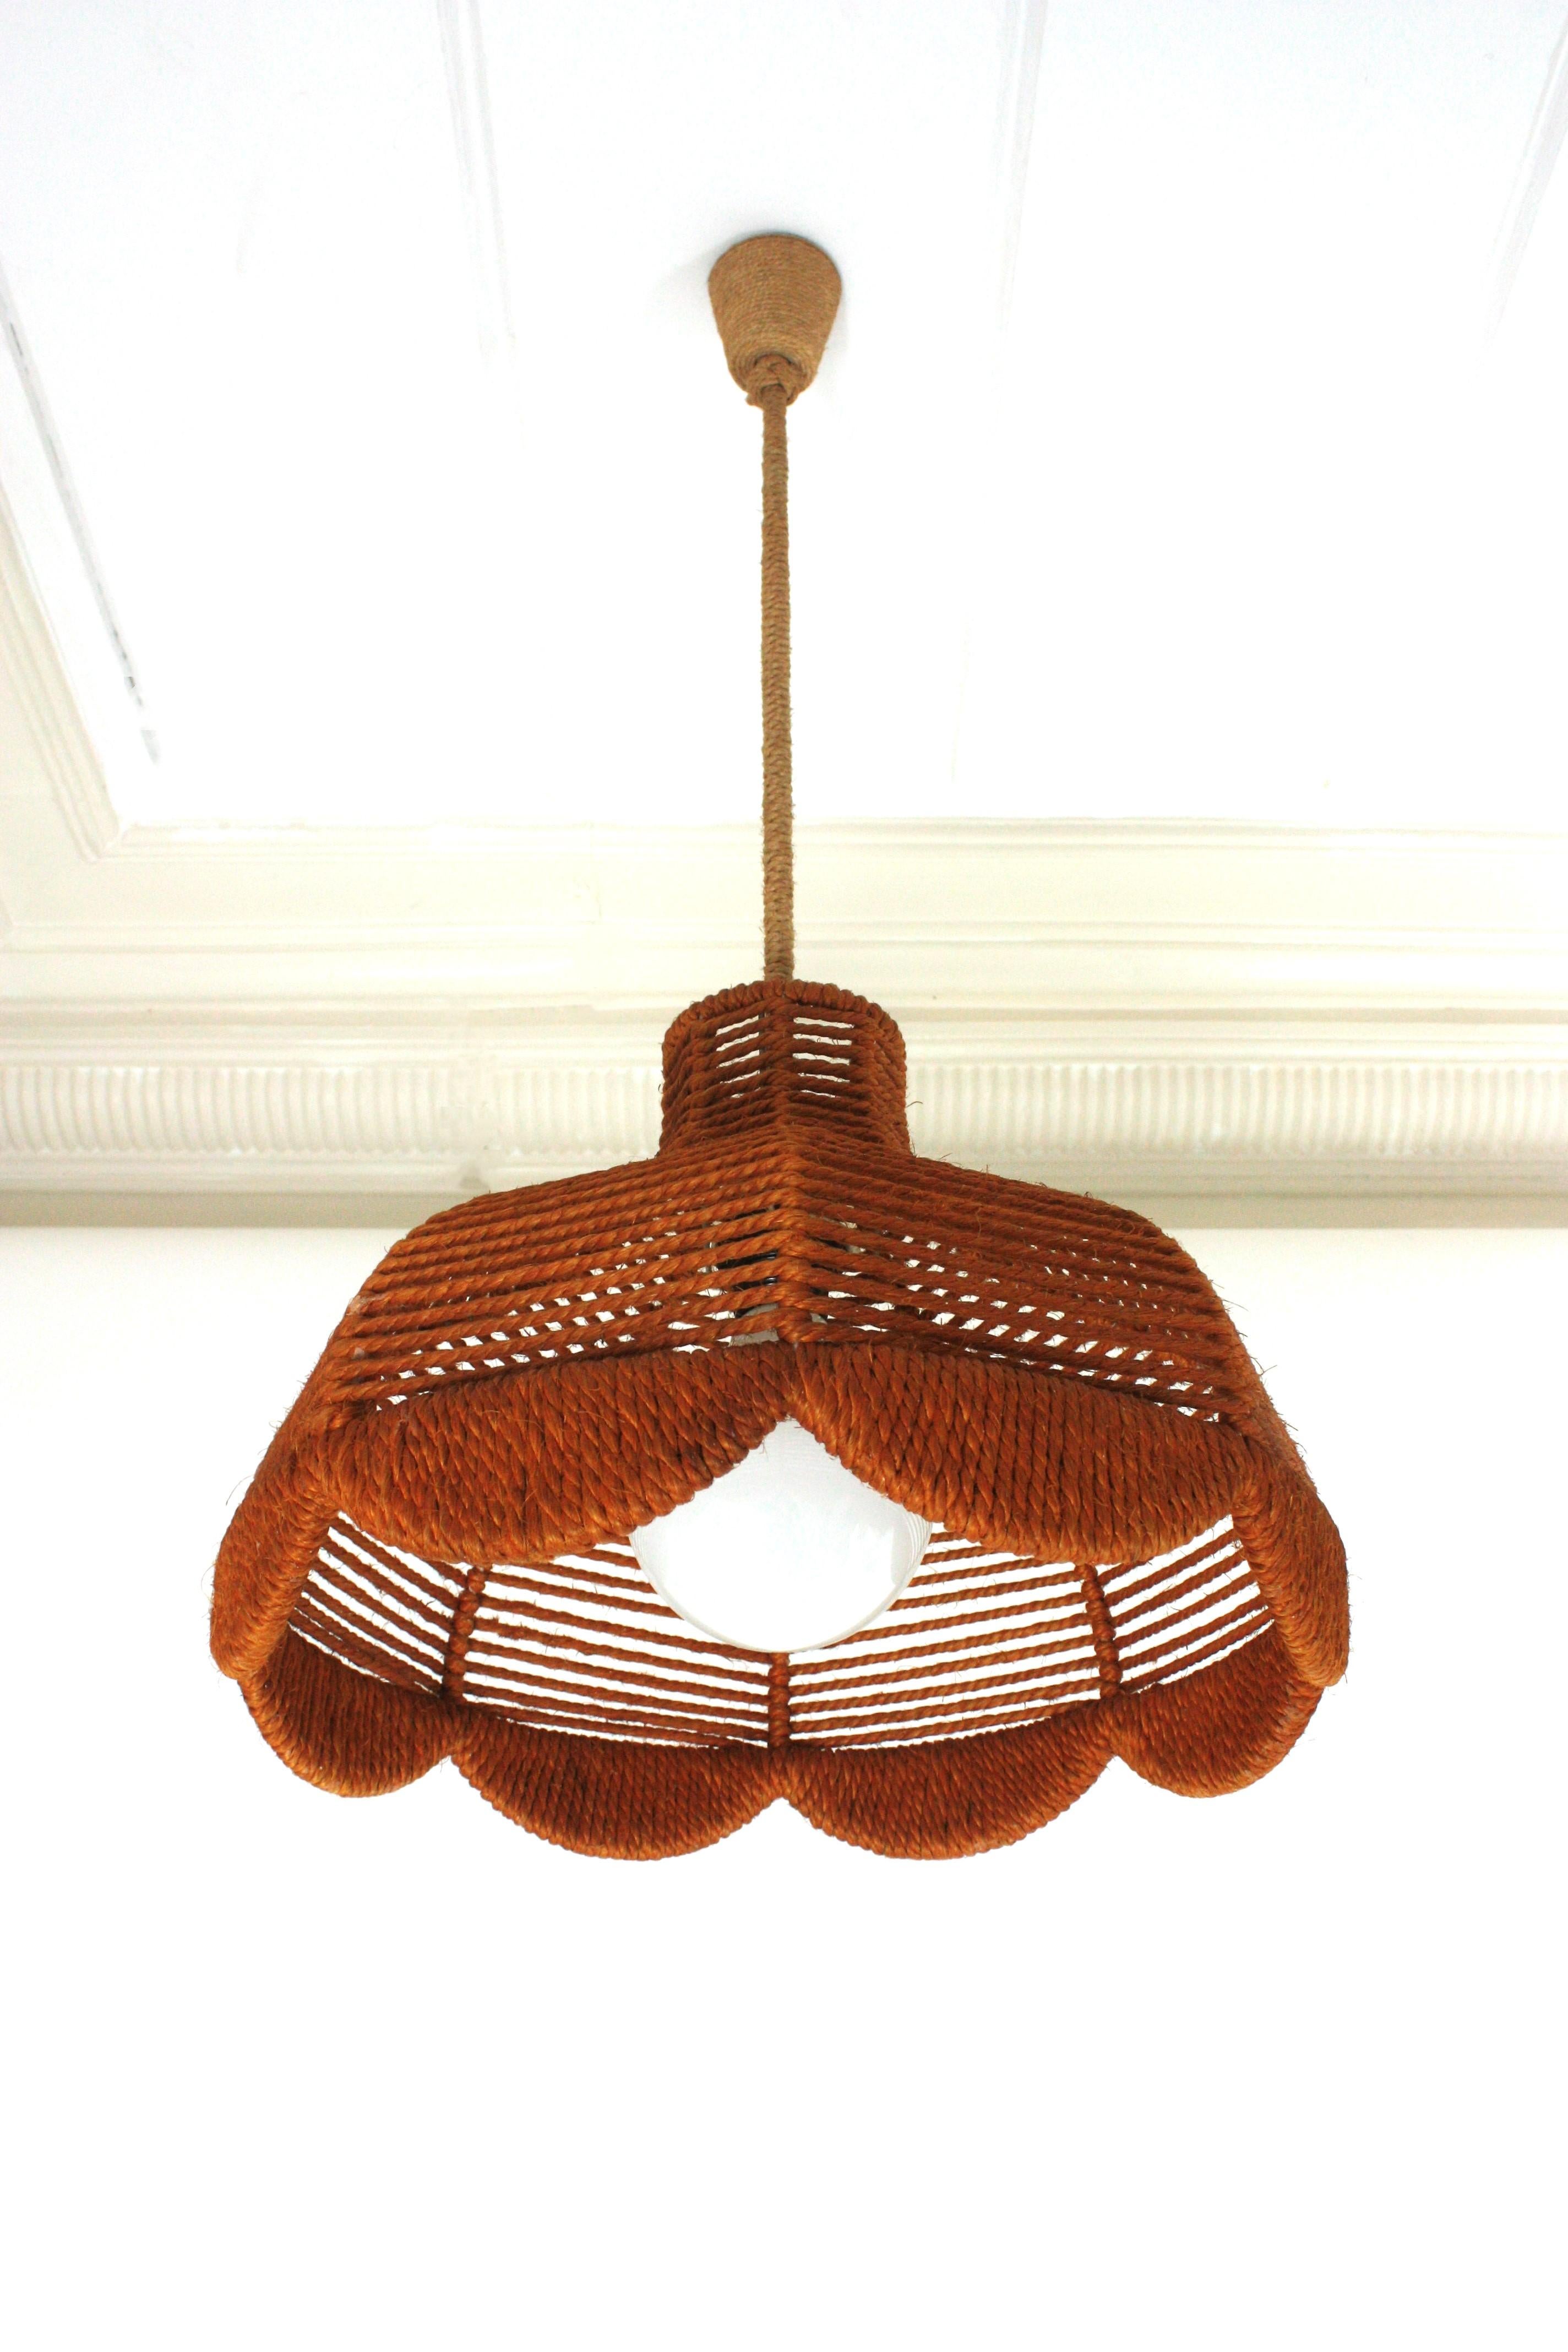 Eye-catching umbrella bell shaped rope pendant light with scalloped bottom, Spain, 1960s
This midcentury suspension lamp features an umbrella bell shaped rope covered lampshade in ginger color with an scalloped bottom. It hangs from a wire wraped